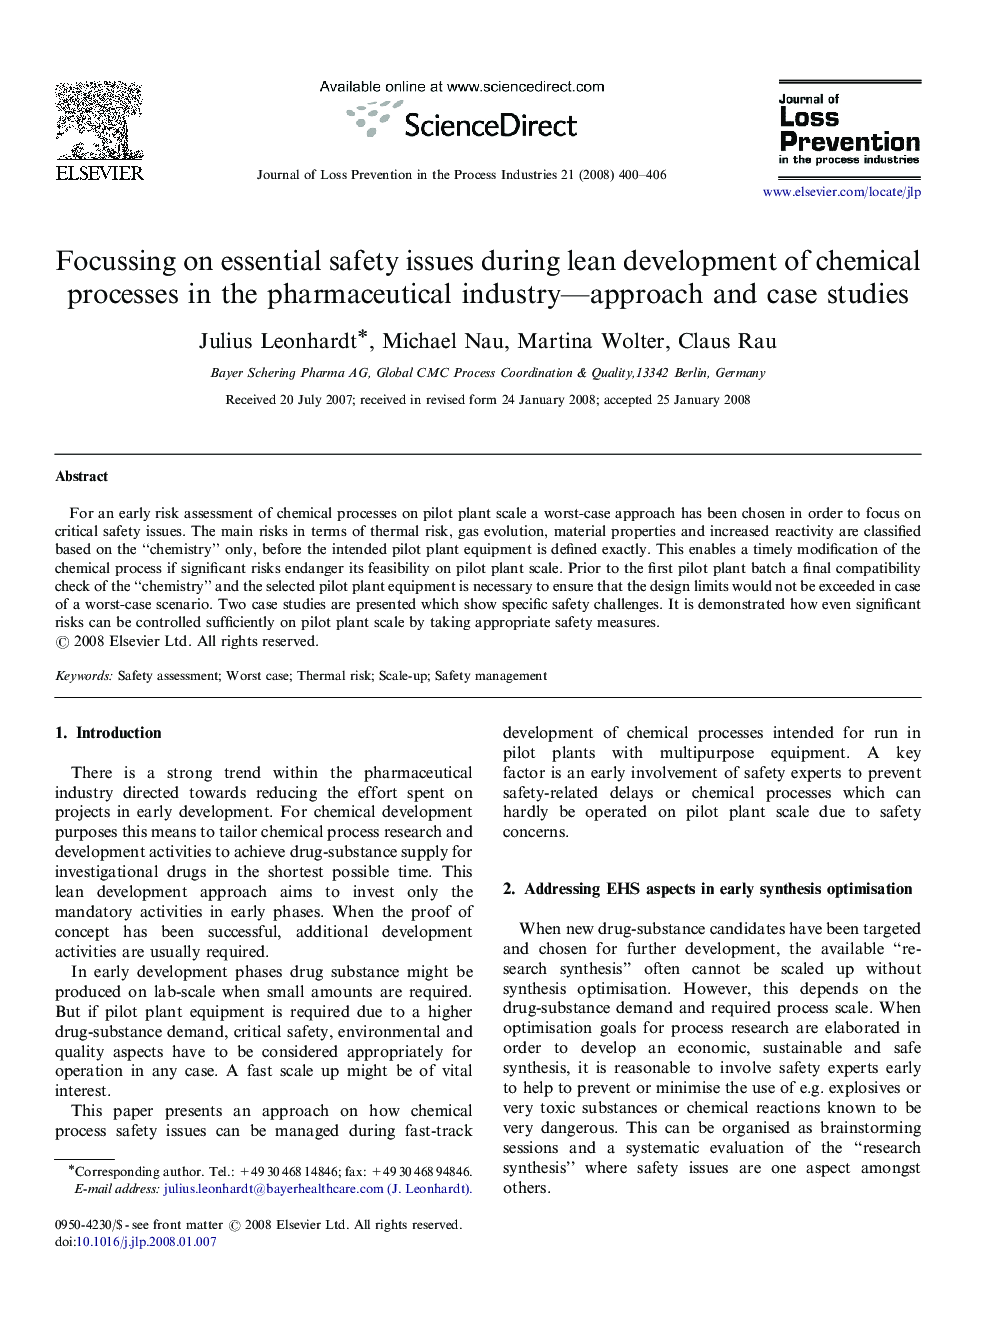 Focussing on essential safety issues during lean development of chemical processes in the pharmaceutical industry—approach and case studies